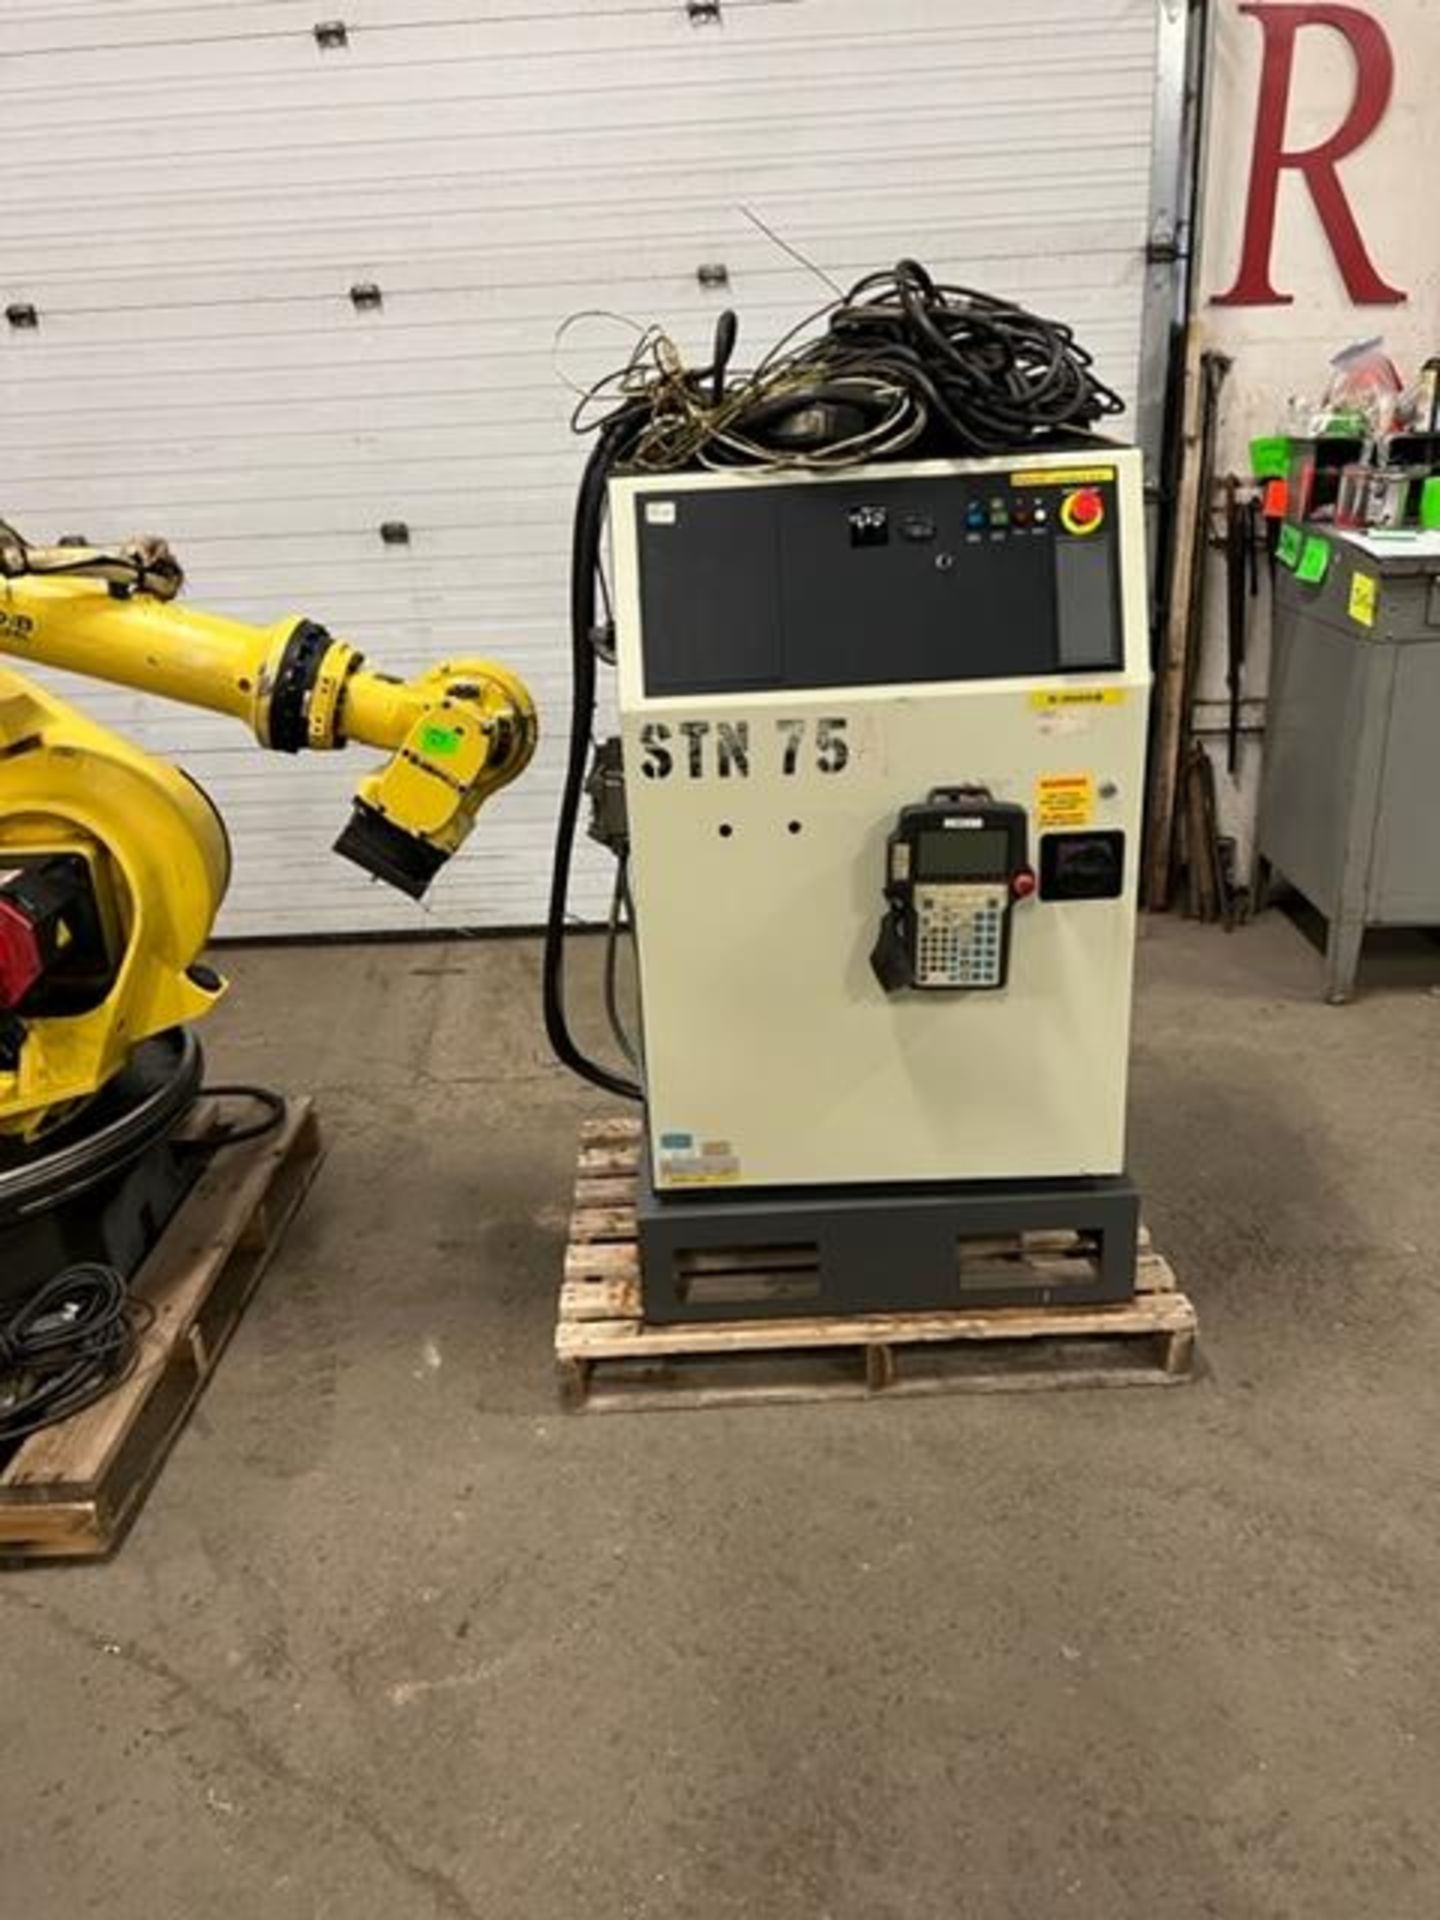 MINT 2009 Fanuc Handling Robot Model R-2000iB 125L - 125kg payload with R-30iA Controller and - Image 3 of 3